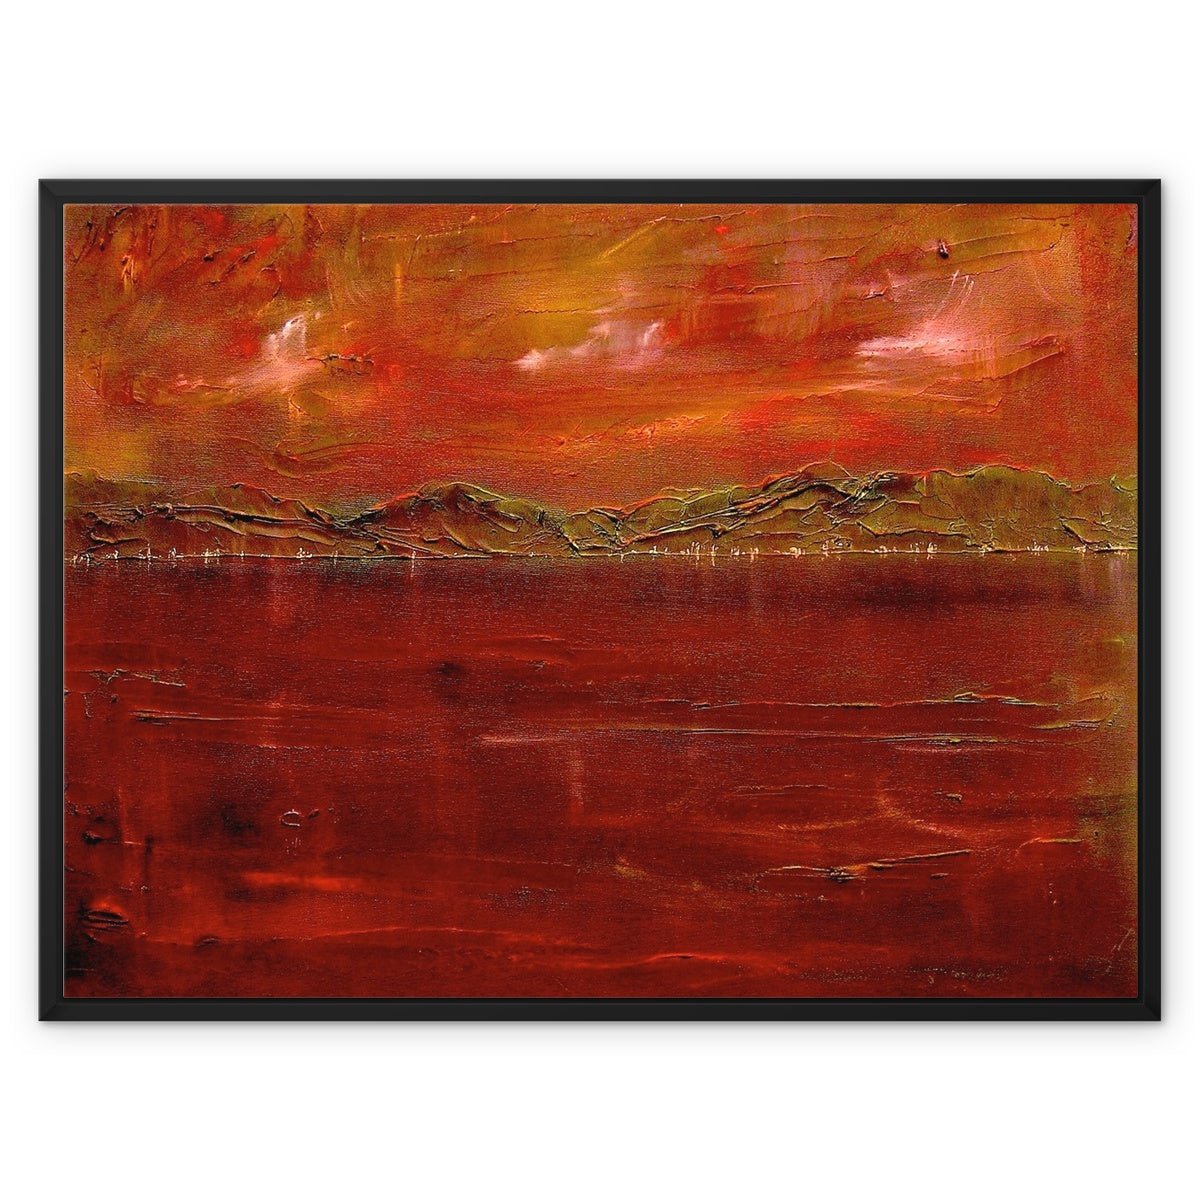 Deep Clyde Dusk Painting | Framed Canvas From Scotland-Floating Framed Canvas Prints-River Clyde Art Gallery-32"x24"-Black Frame-Paintings, Prints, Homeware, Art Gifts From Scotland By Scottish Artist Kevin Hunter